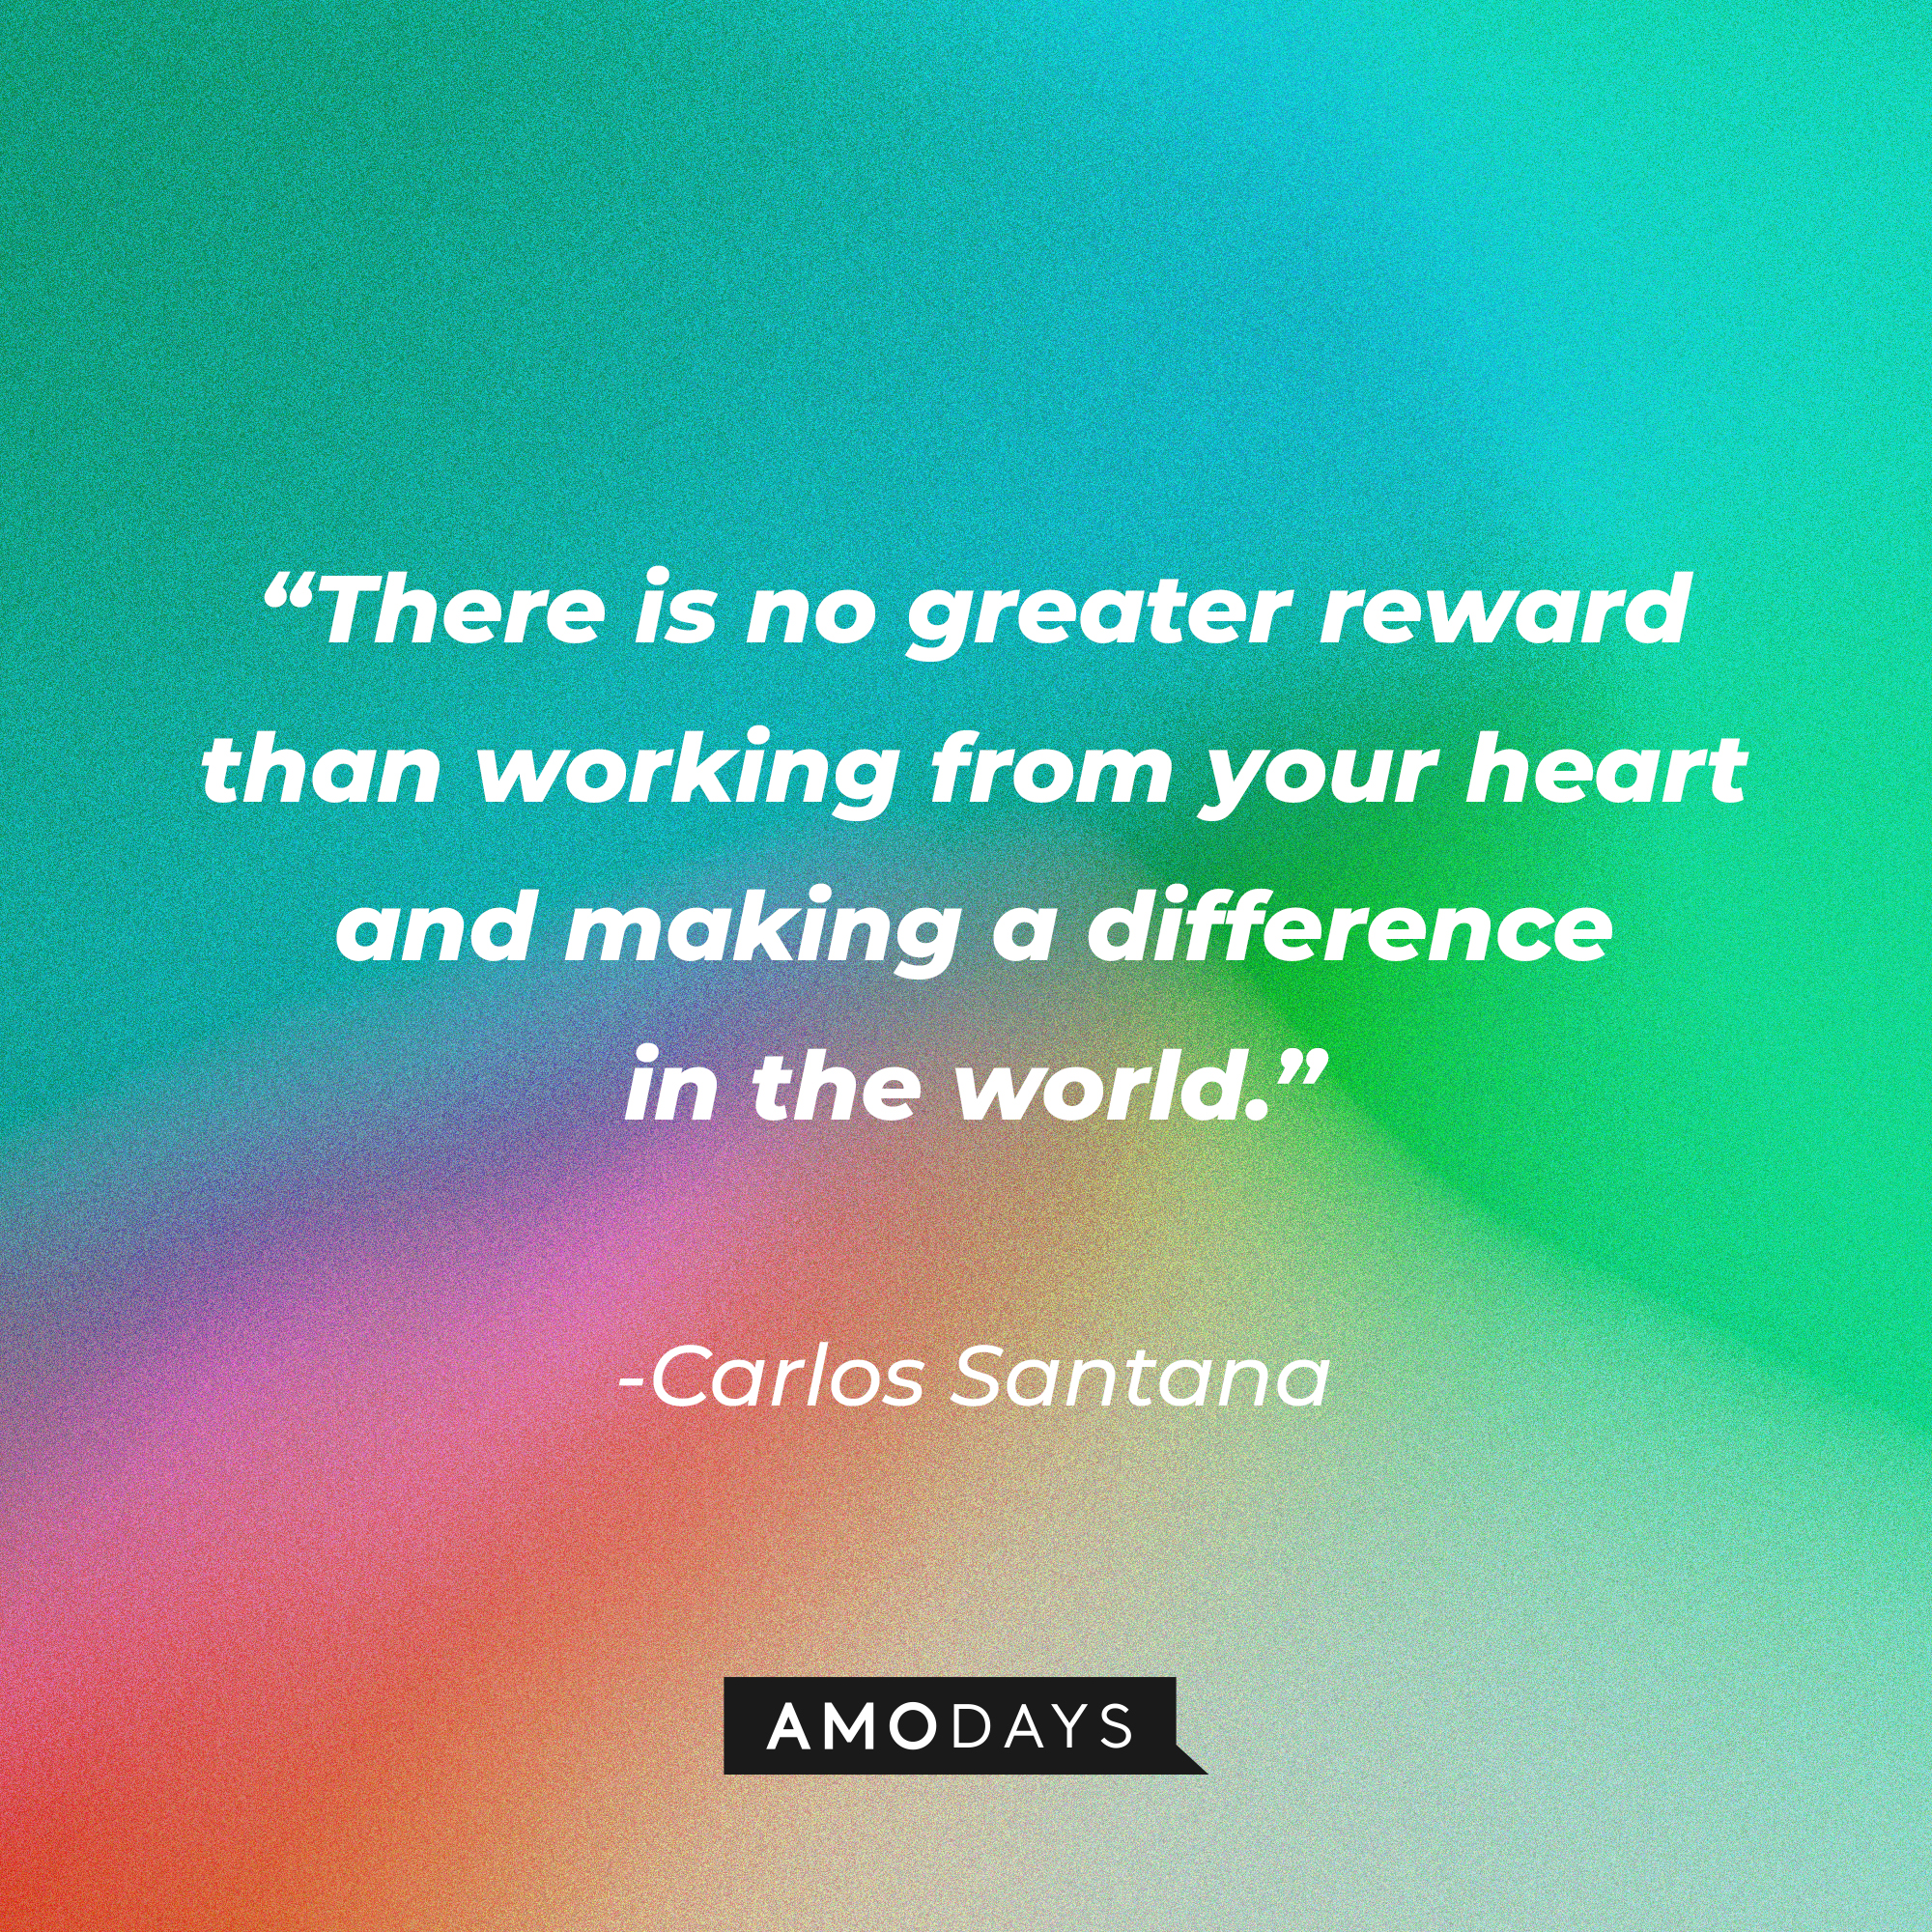 Carlos Santana’s quote: "There is no greater reward than working from your heart and making a difference in the world."┃Source: AmoDays